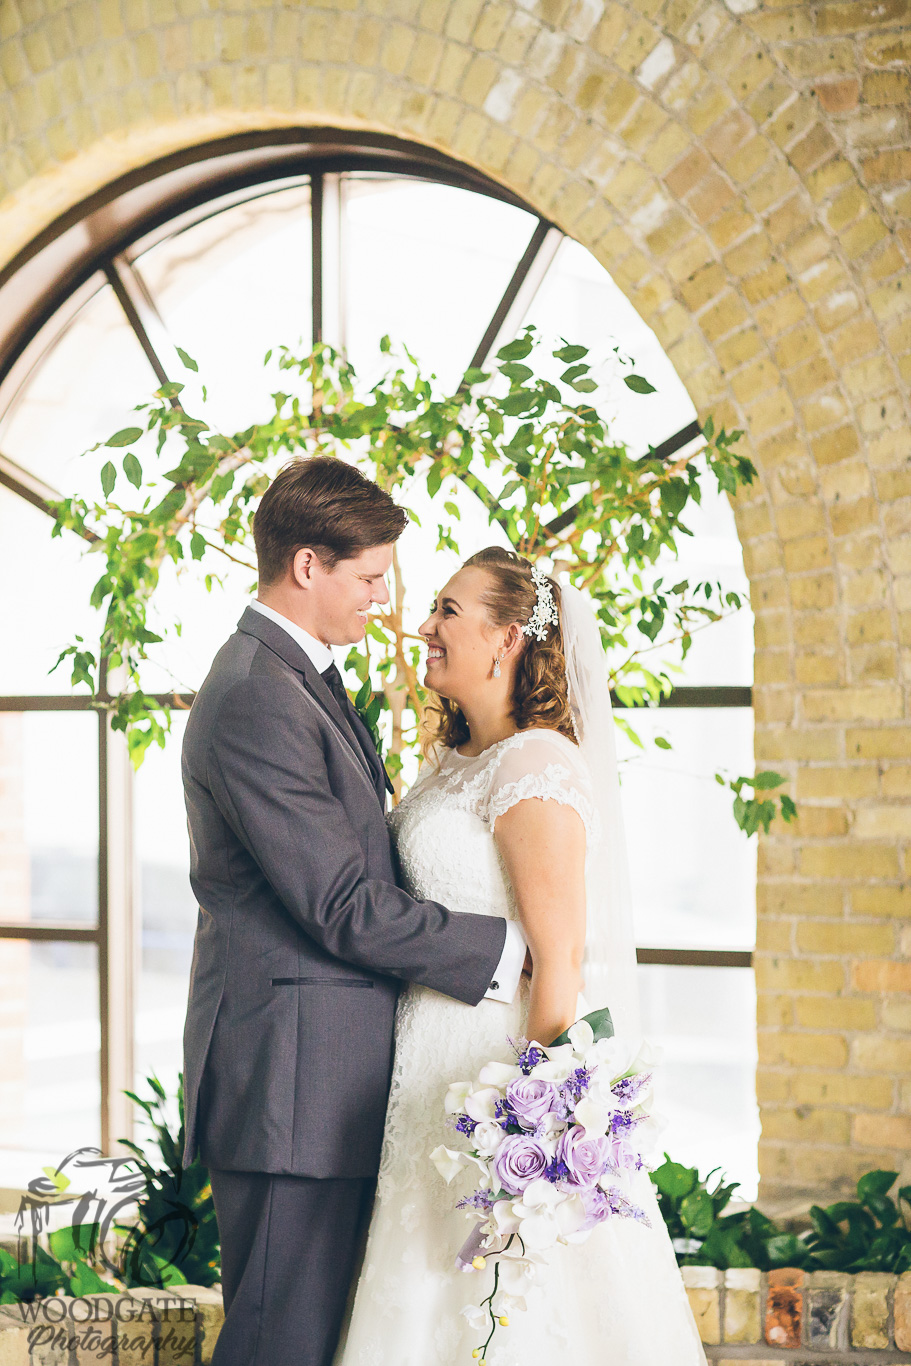 Delta London Armouries wedding Photography, London ontario wedding photography